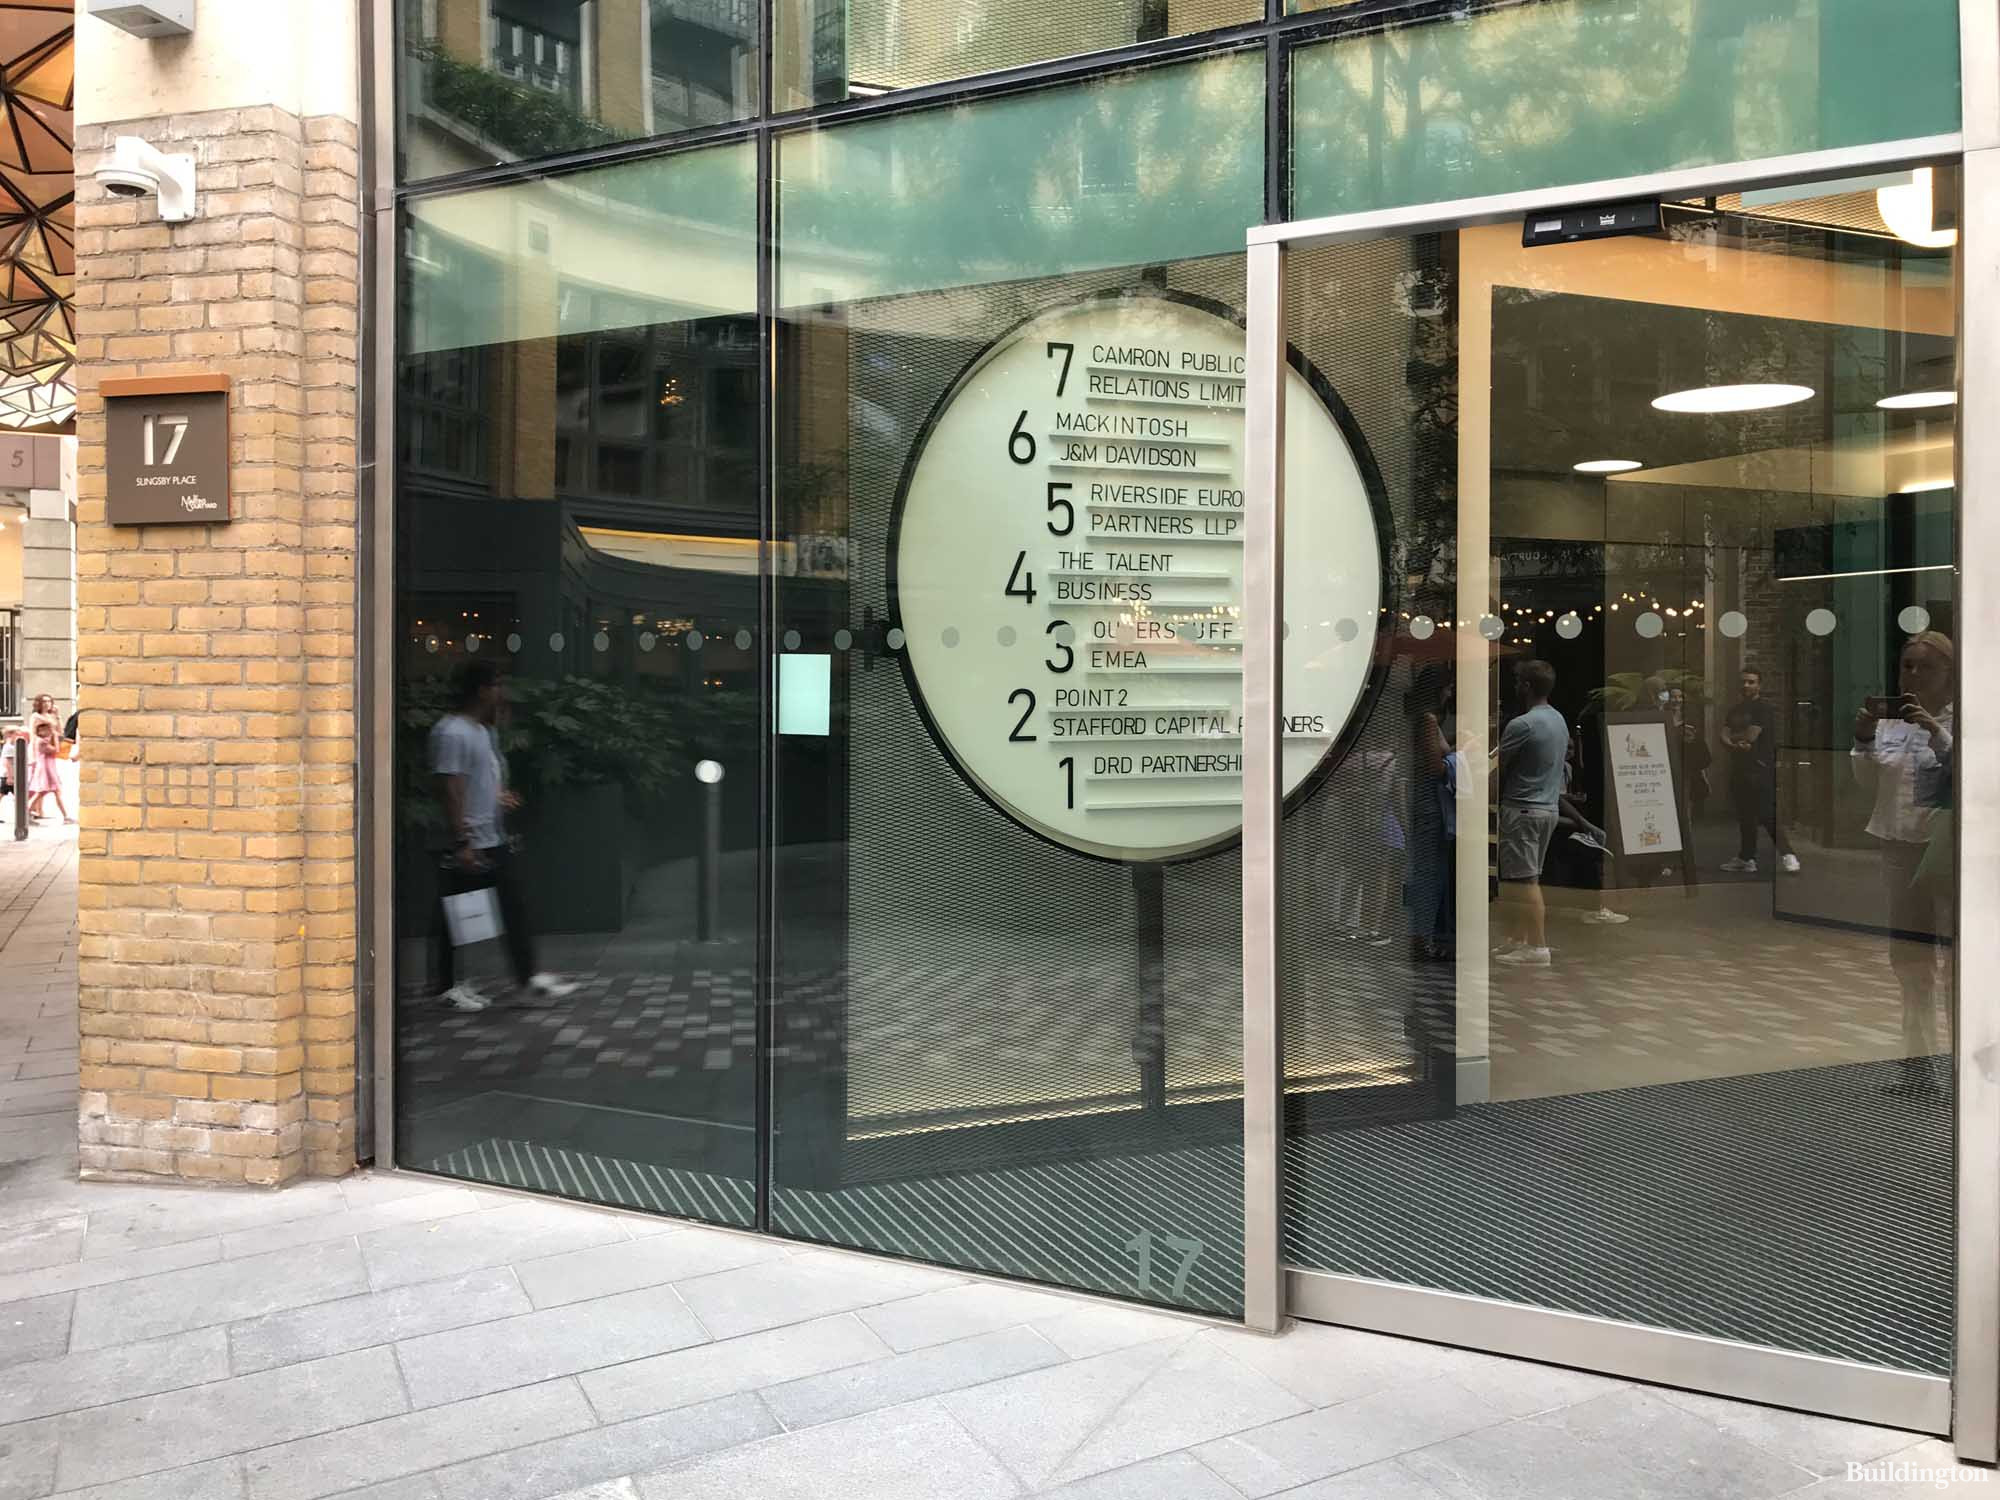 Entrance to 17 Slingsby Place and companies at the office building in St Martins Courtyard in Covent Garden, London WC2.